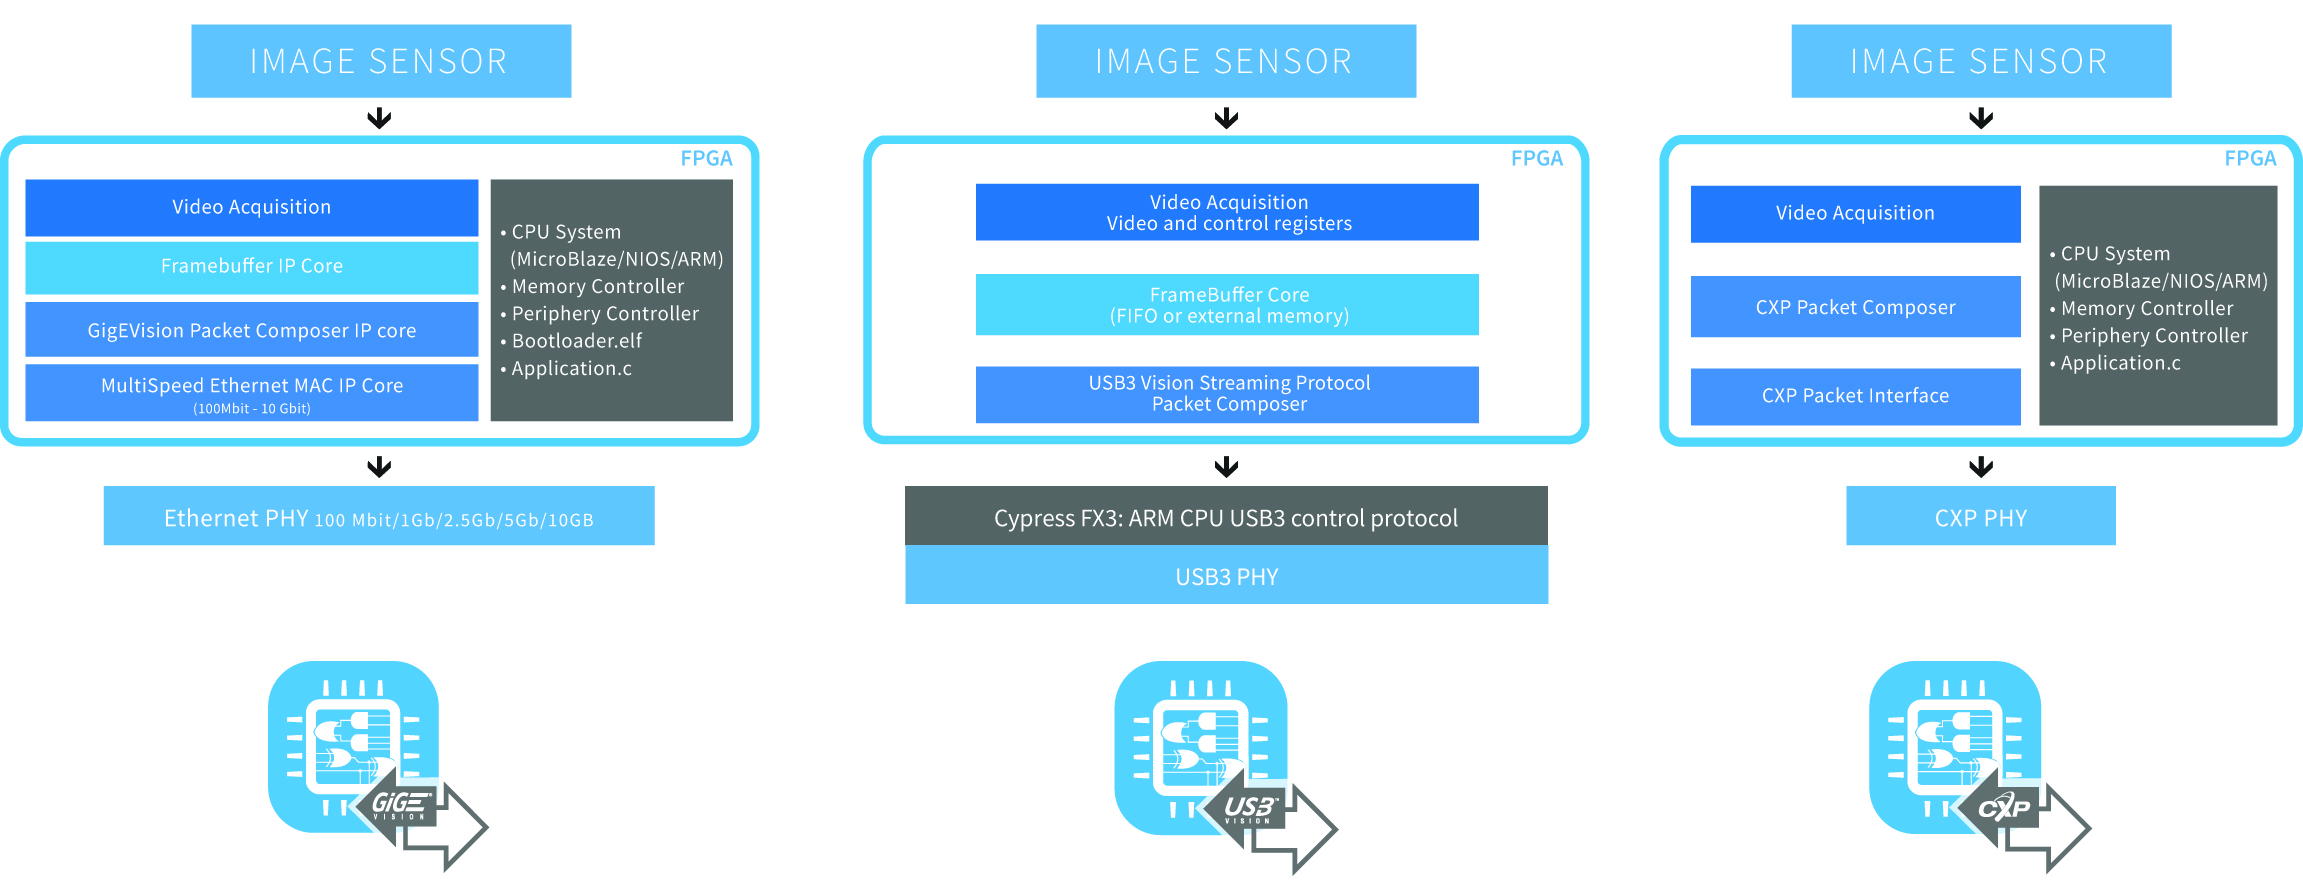 Image 1 | IP cores secure the interoperability of the camera and host while ensuring compliance with the latest version of the interface layer. Sensor to Image’s Vision Standard IP Cores solutions are delivered as a working reference design along with FPGA IP cores. (Bild: Euresys s.a.)